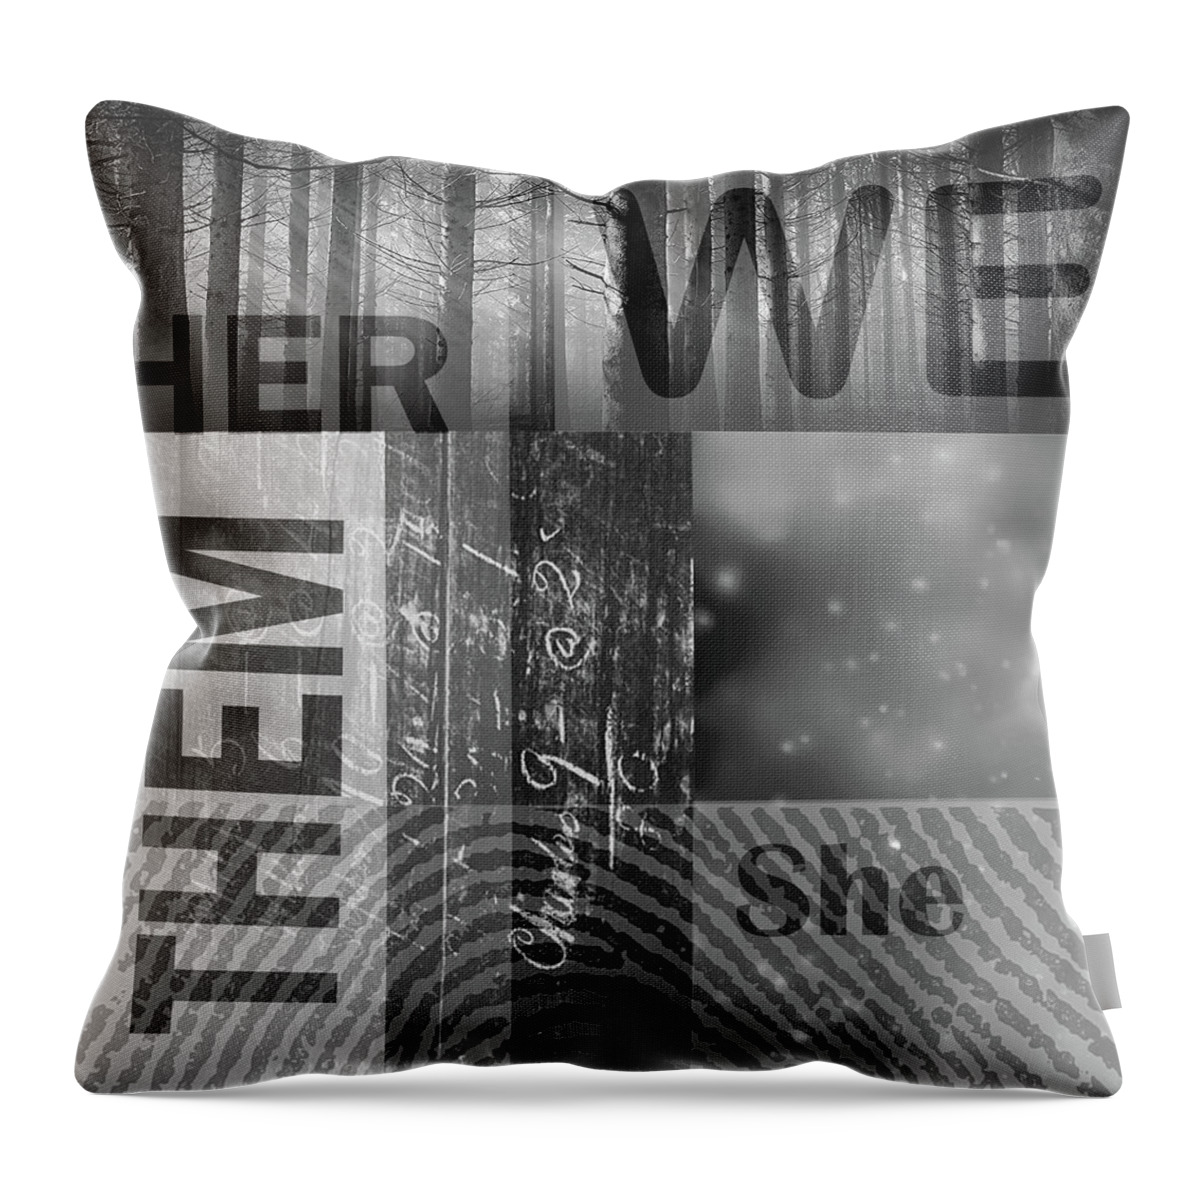 Feminist Abstract Throw Pillow featuring the digital art For Her by Nancy Merkle